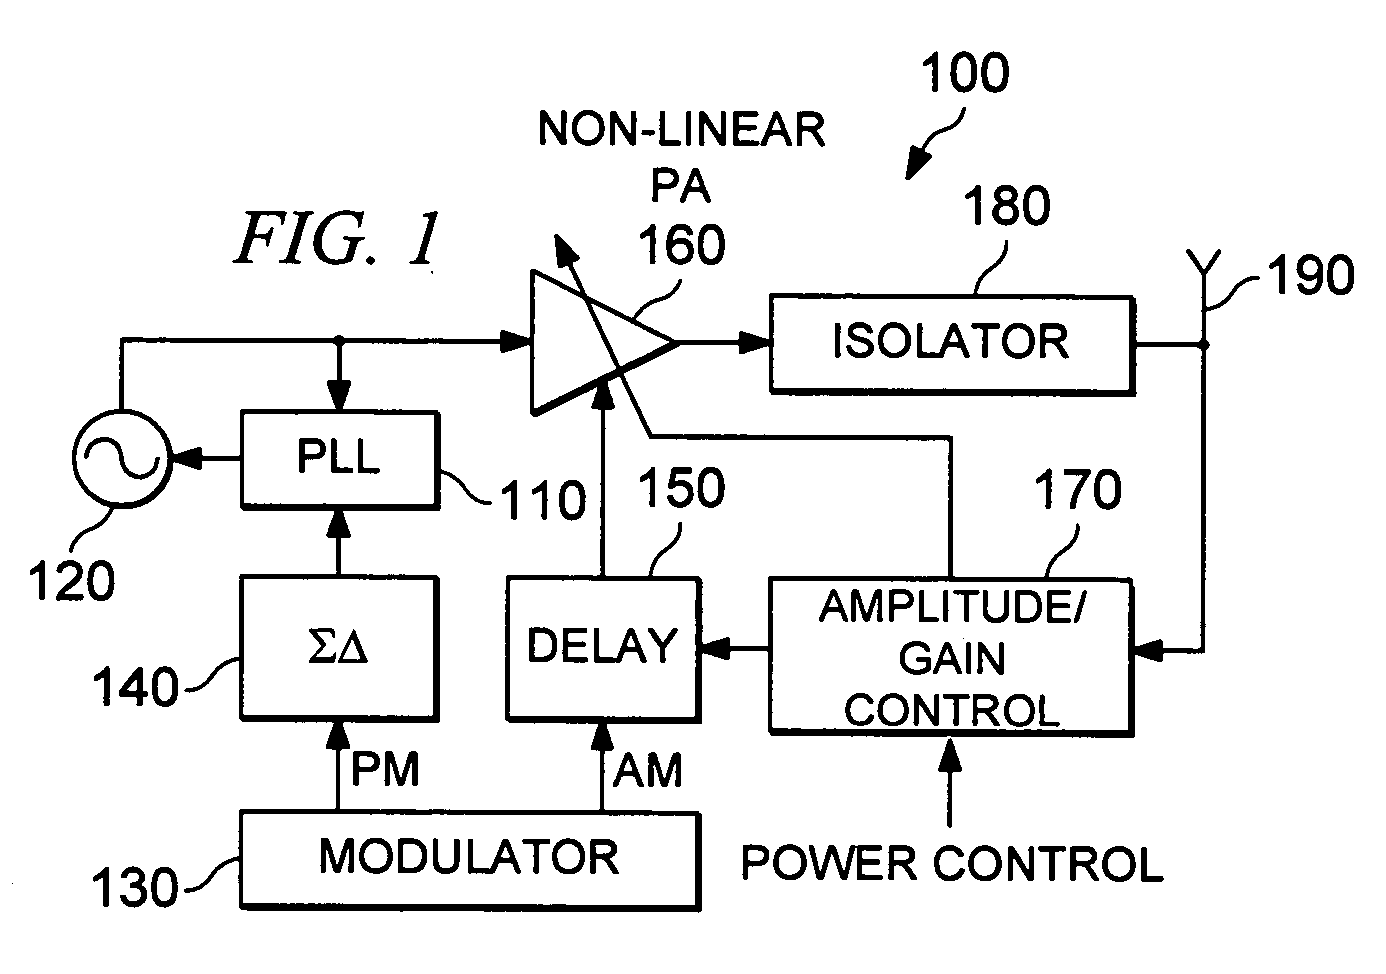 DAC based switching power amplifier